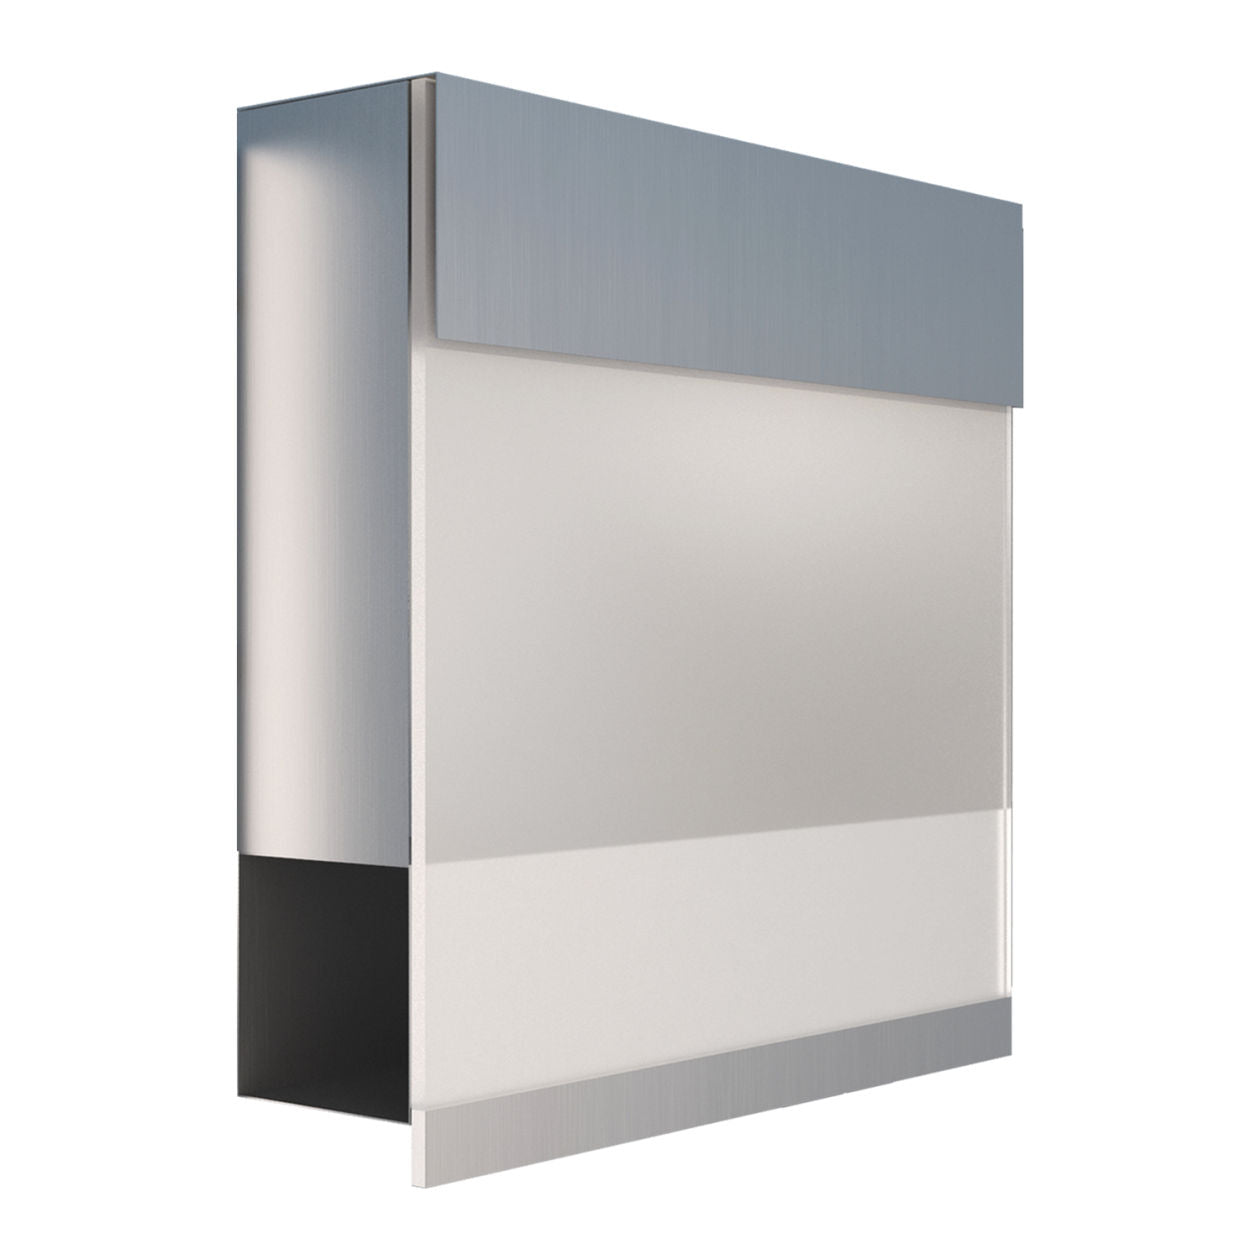 MANHATTAN by Bravios - Wall-mounted stainless steel mailbox with translucent white front panel